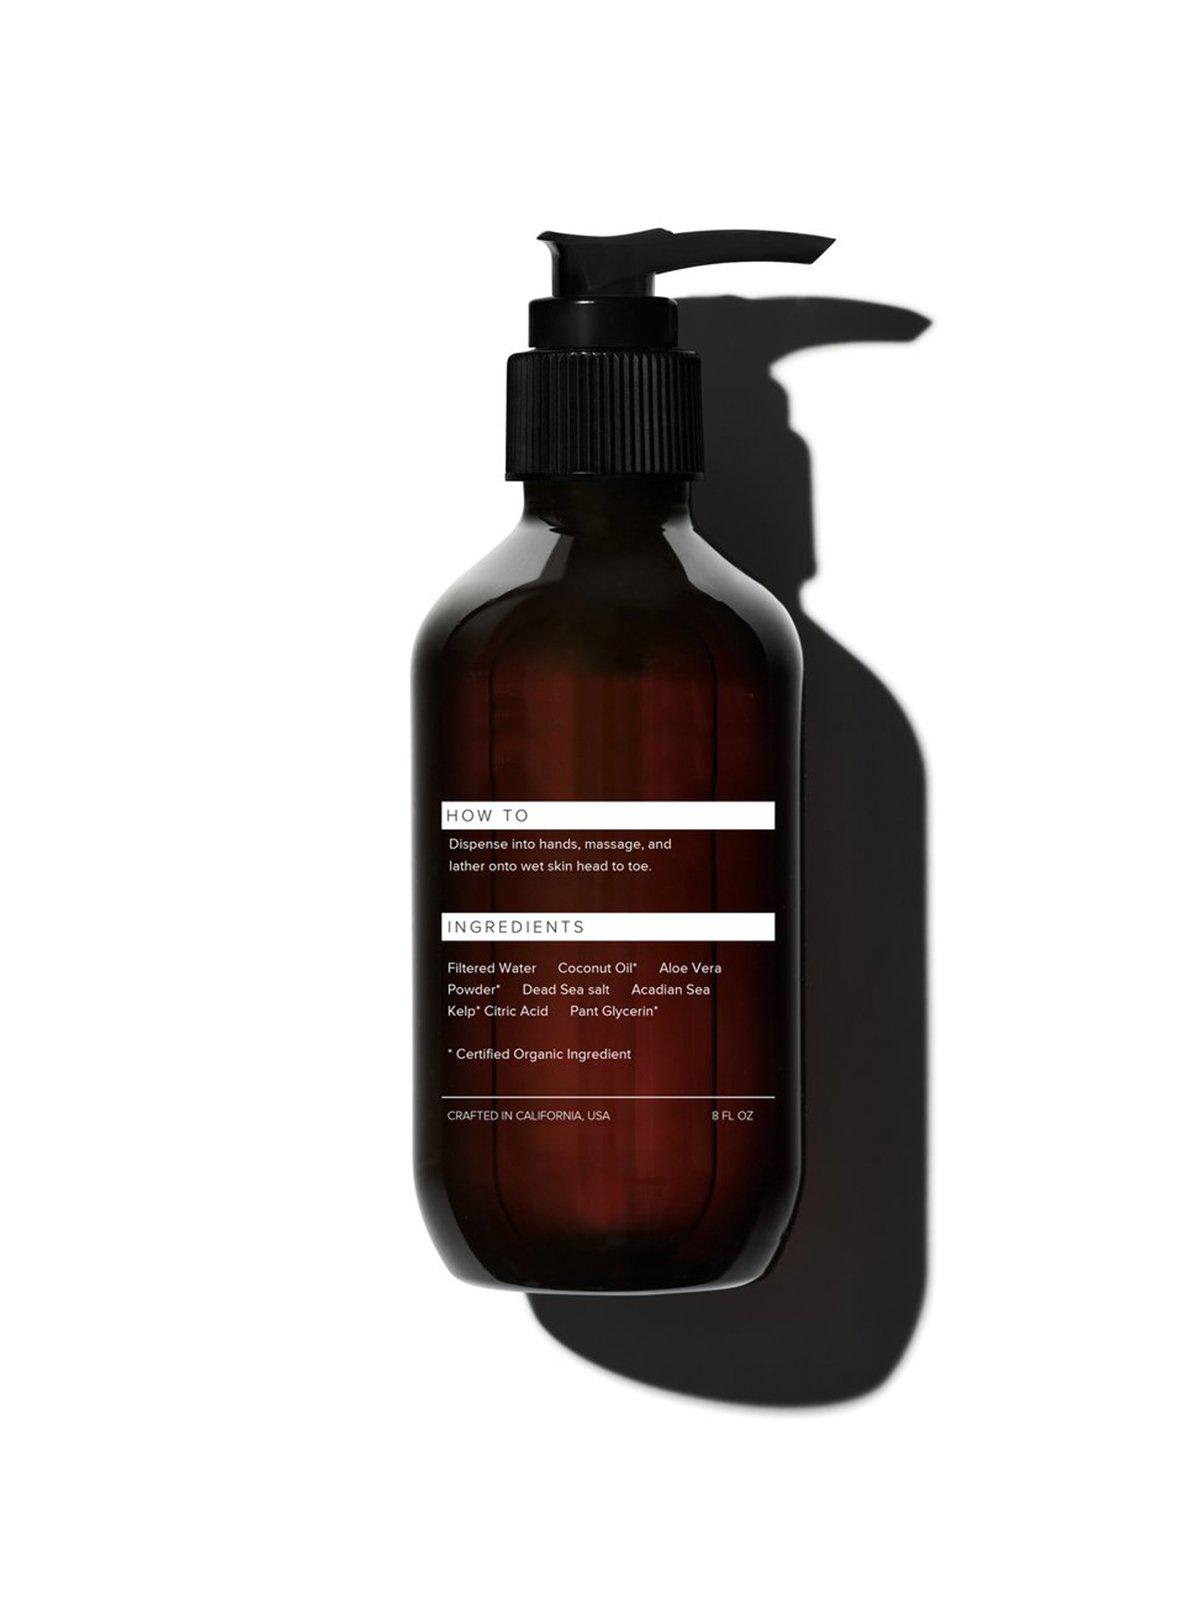 Jack Henry Cleanse+ 8oz Hair/Face/Body/Hands - MORE by Morello Indonesia